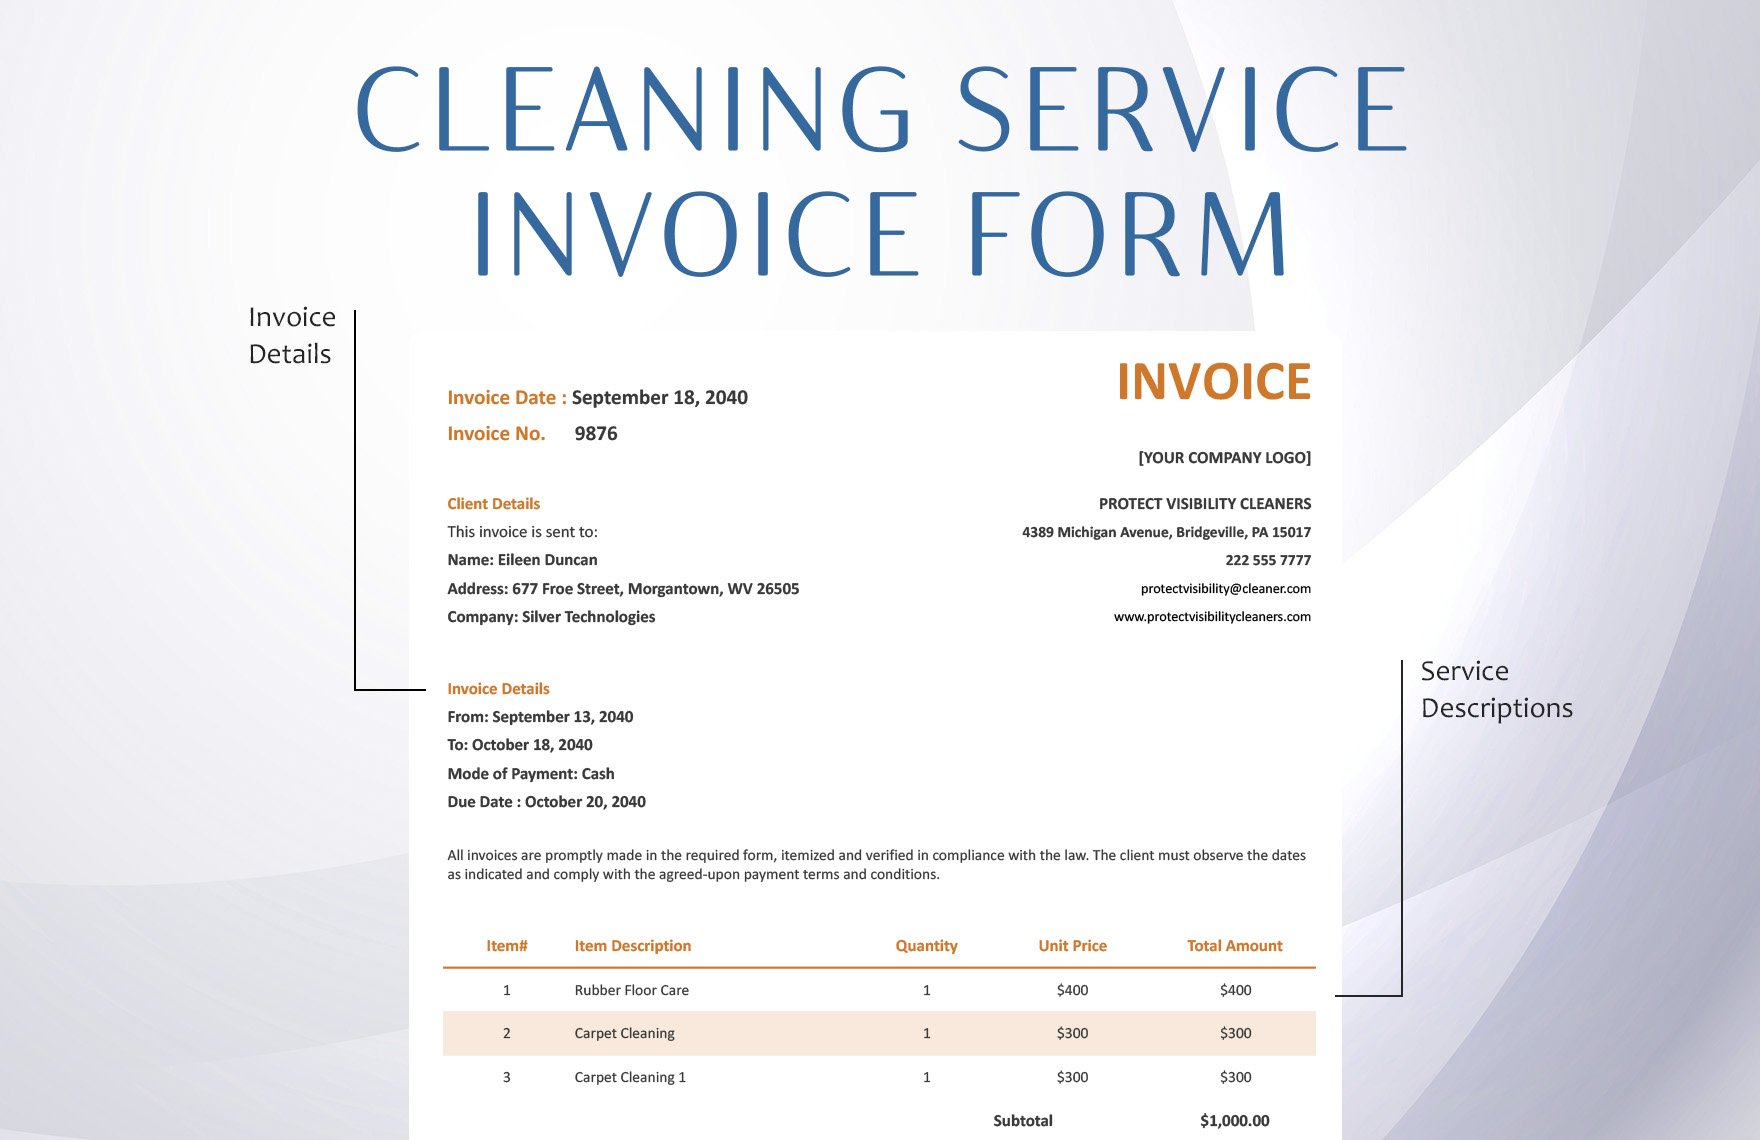 Cleaning Service Invoice Form Template